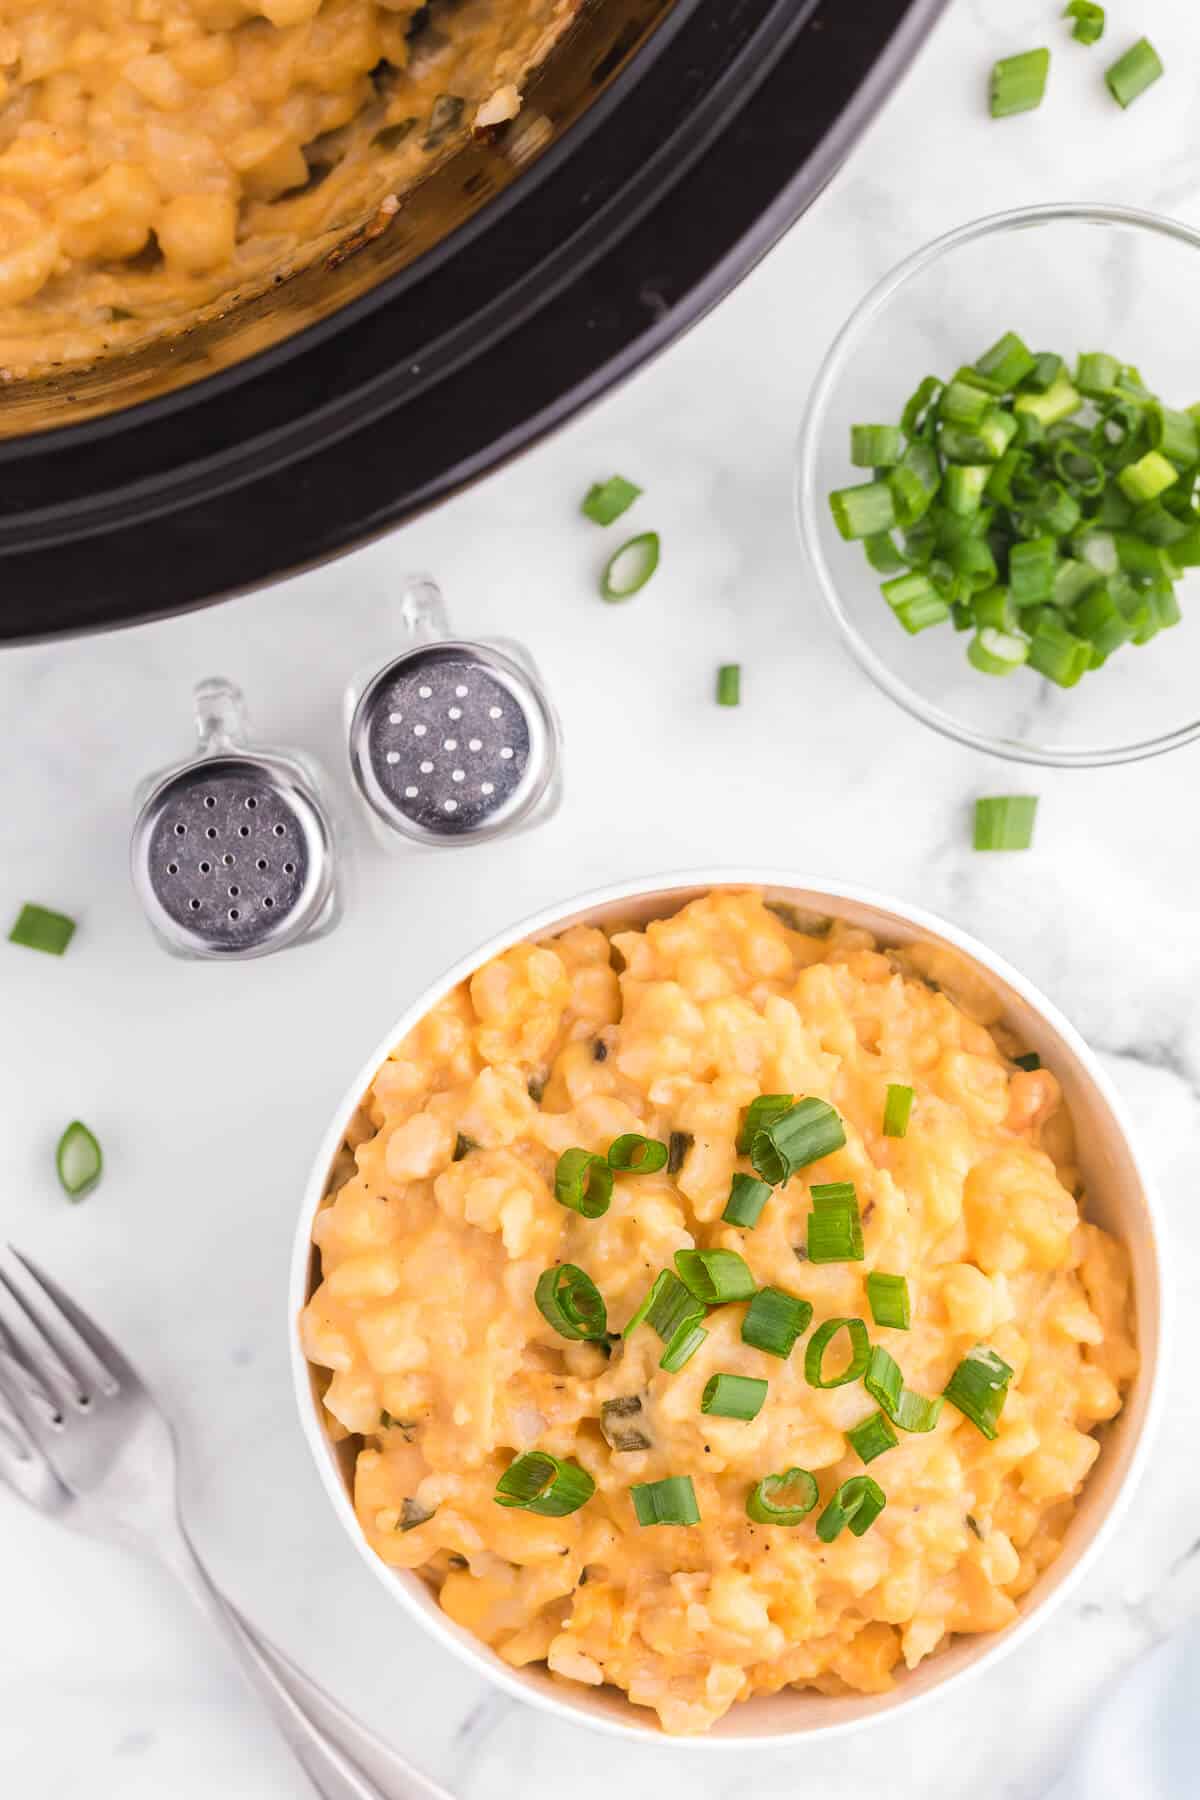 Slow Cooker Cheesy Potatoes - The creamiest potato recipe! Grab your Crockpot for this 4-ingredient side dish with frozen hash browns, cheese soup, and evaporated milk.